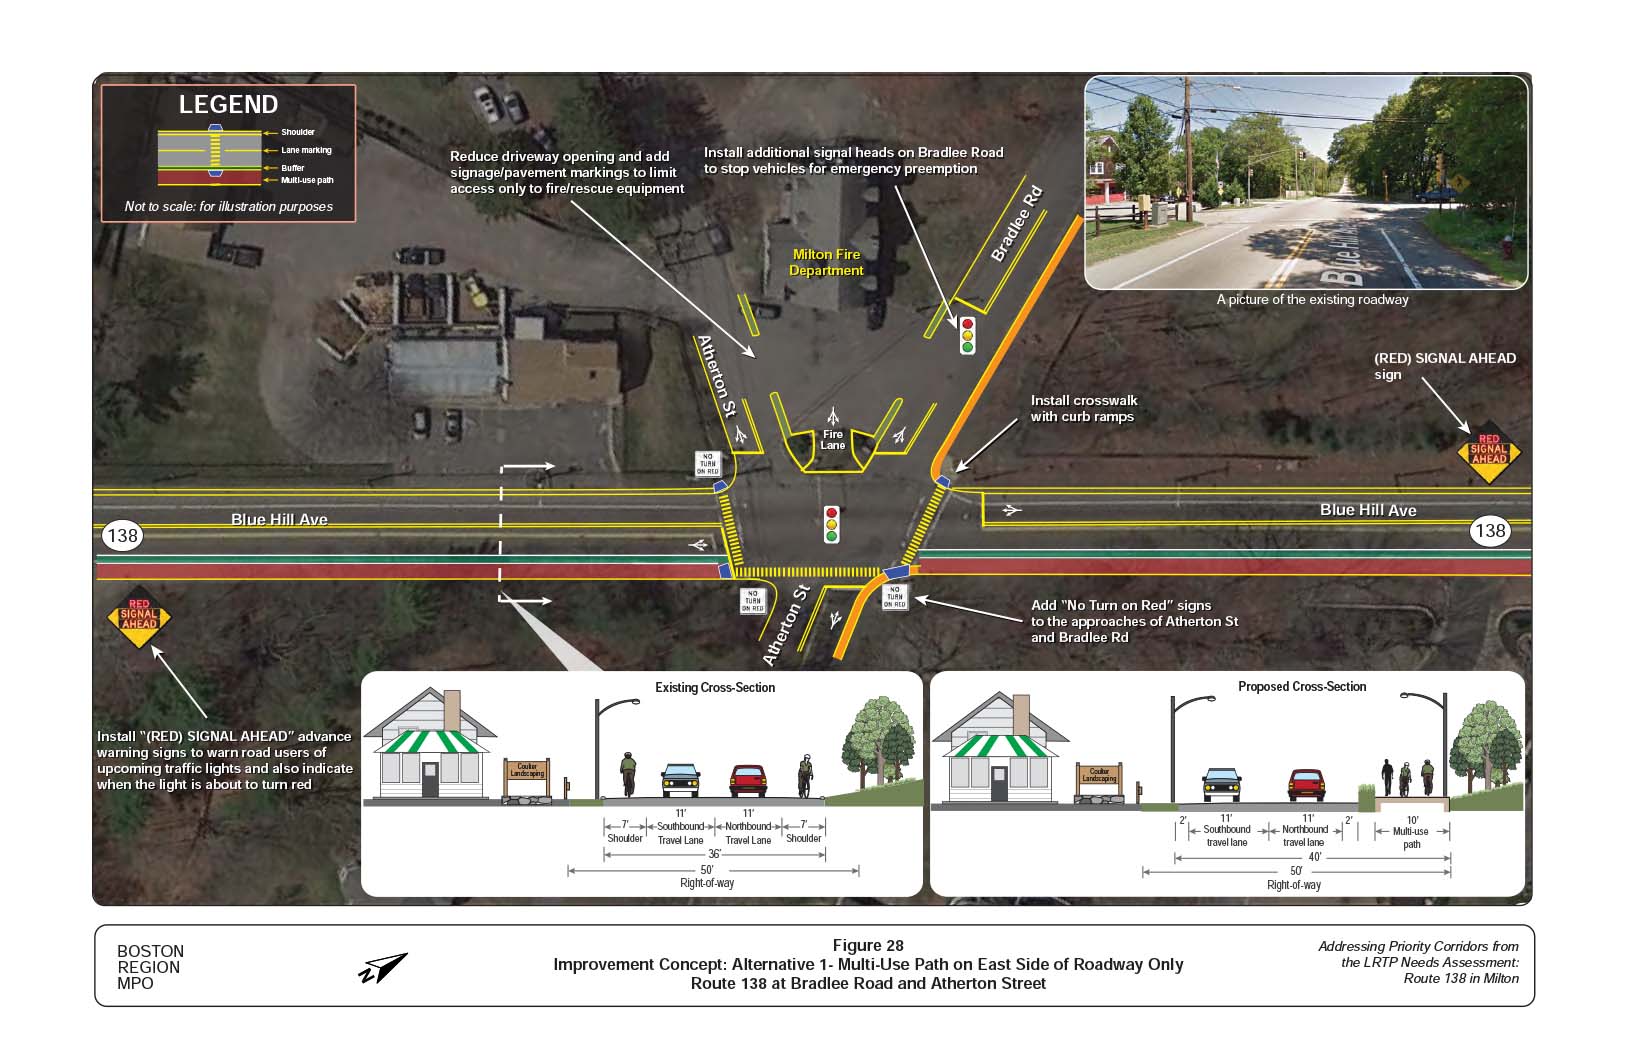 Figure 28 is an aerial photo of Route 138 at Bradlee Road and Atherton Street showing Alternative 1, a multi-use path on the east side of the roadway, and overlays showing the existing and proposed cross-sections.